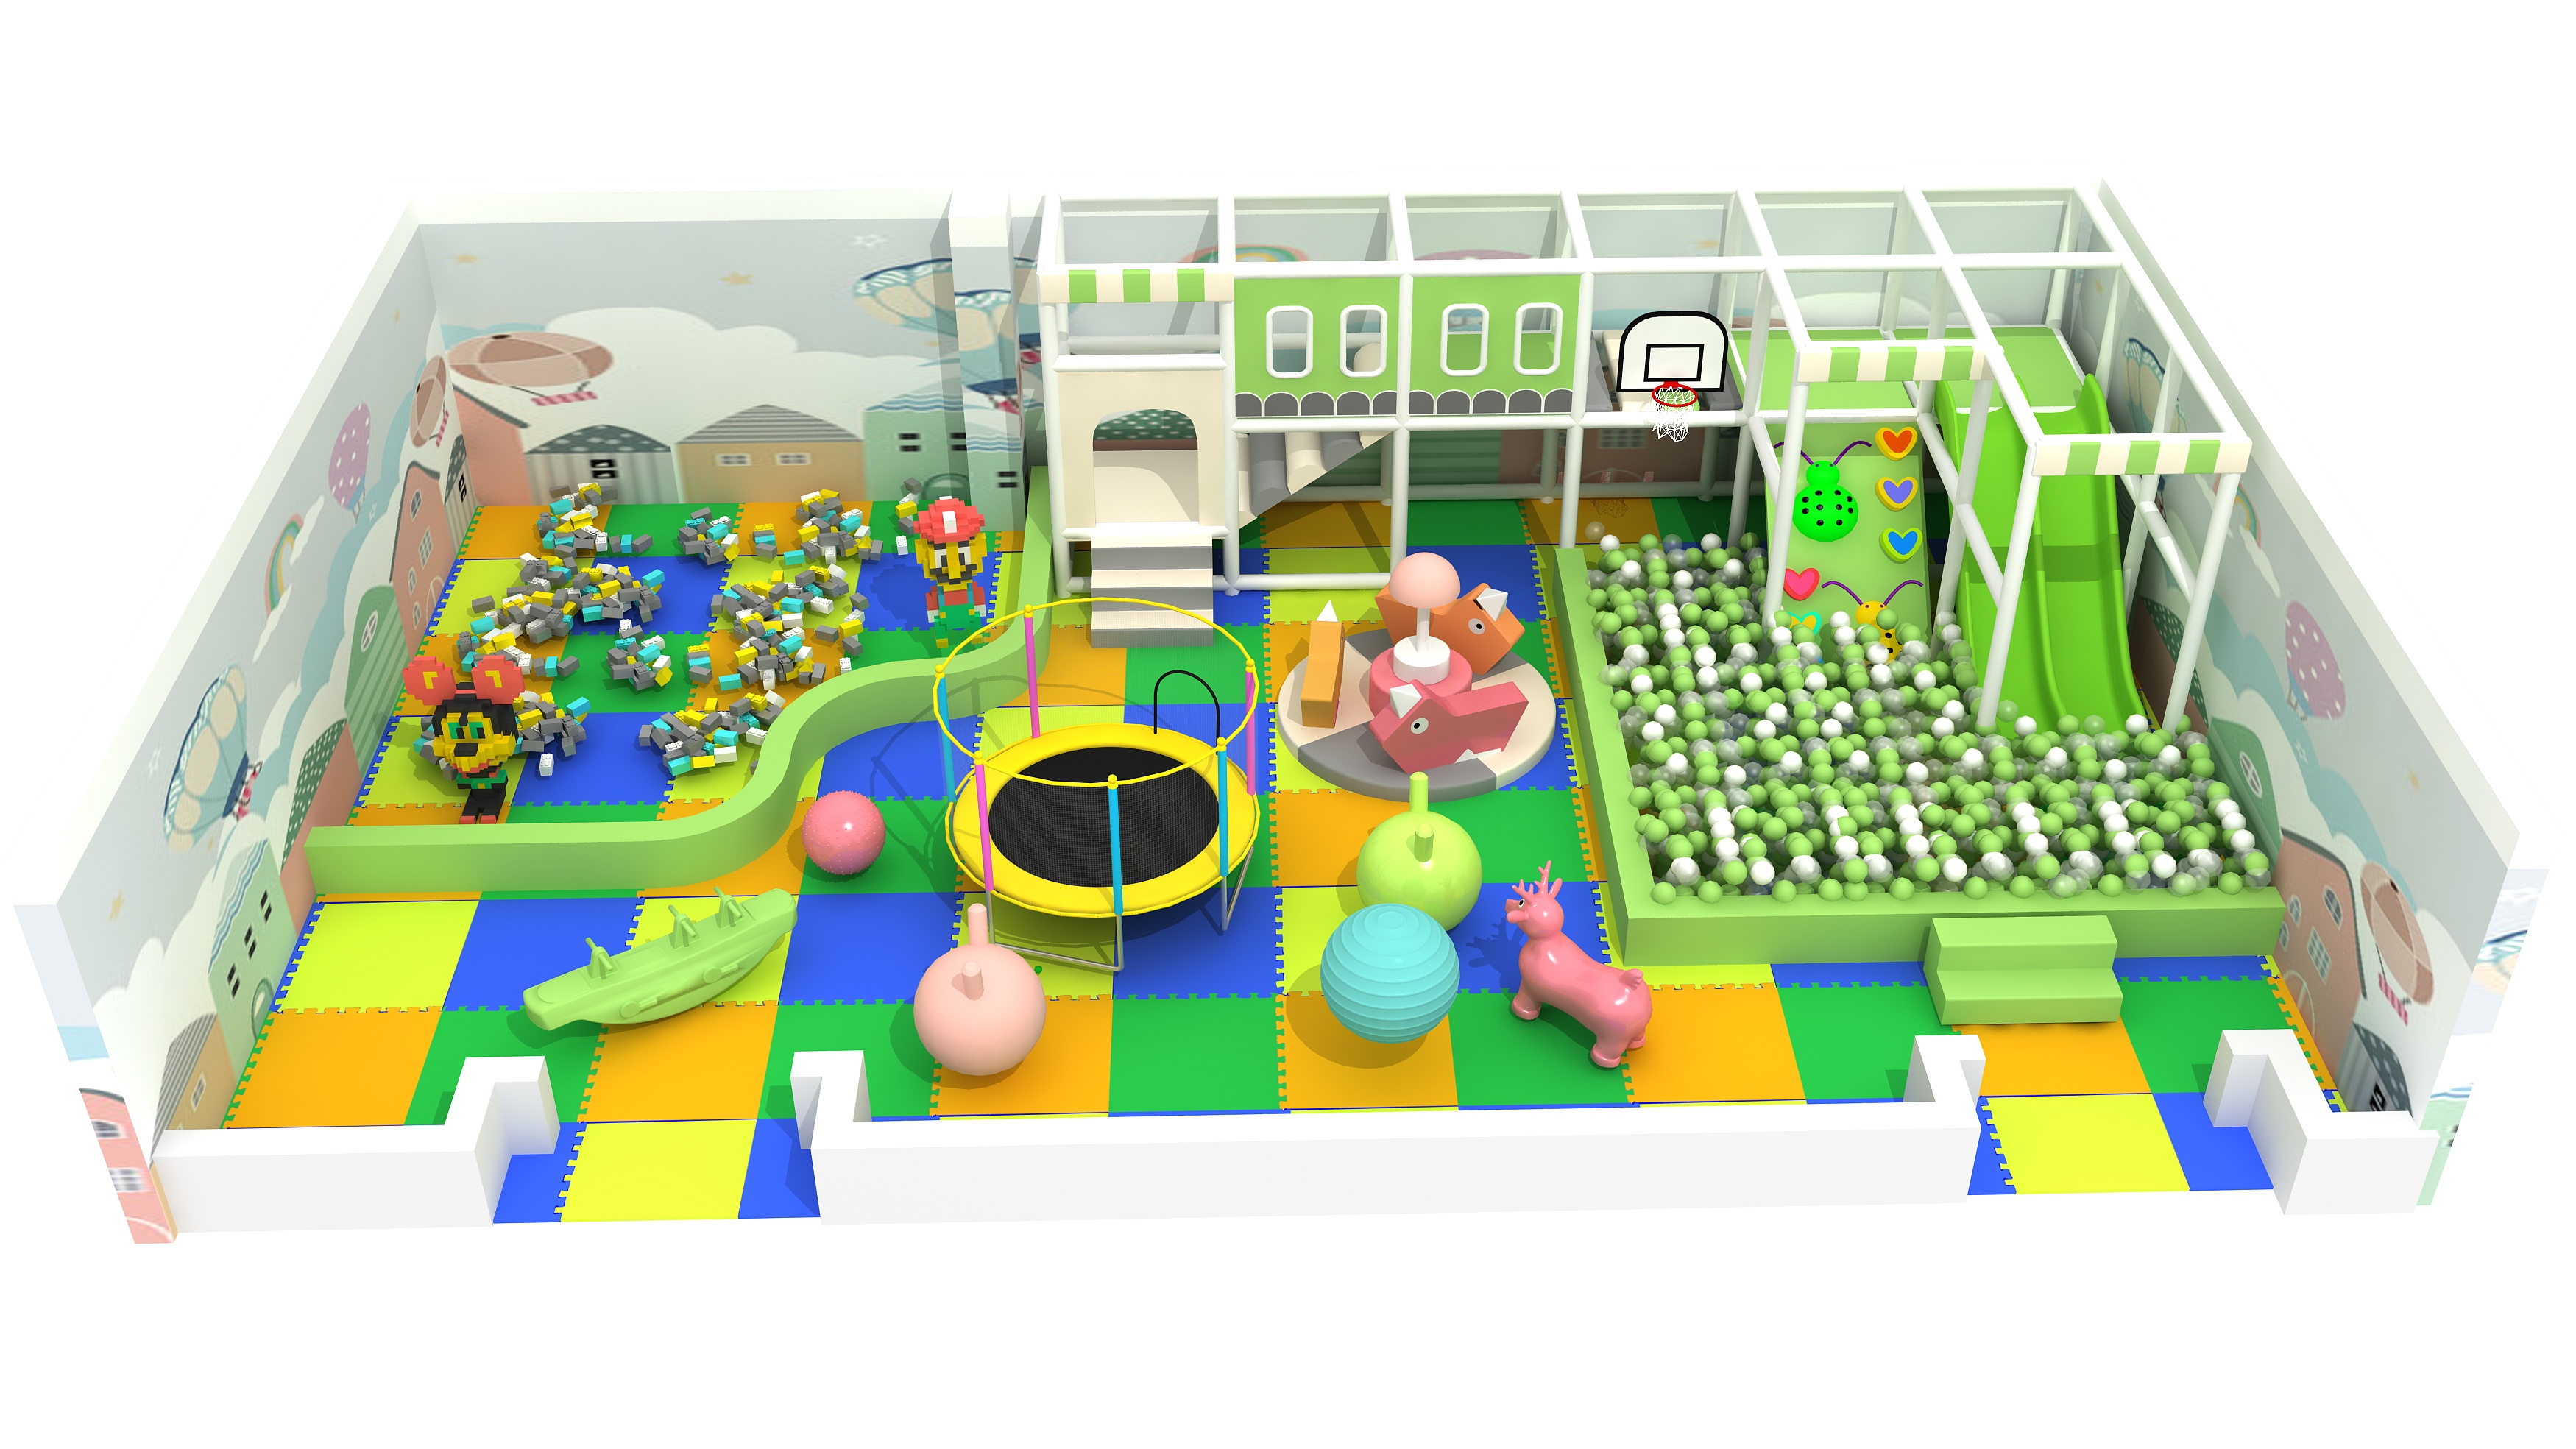 What do you think the industry of indoor playground business in 2023?